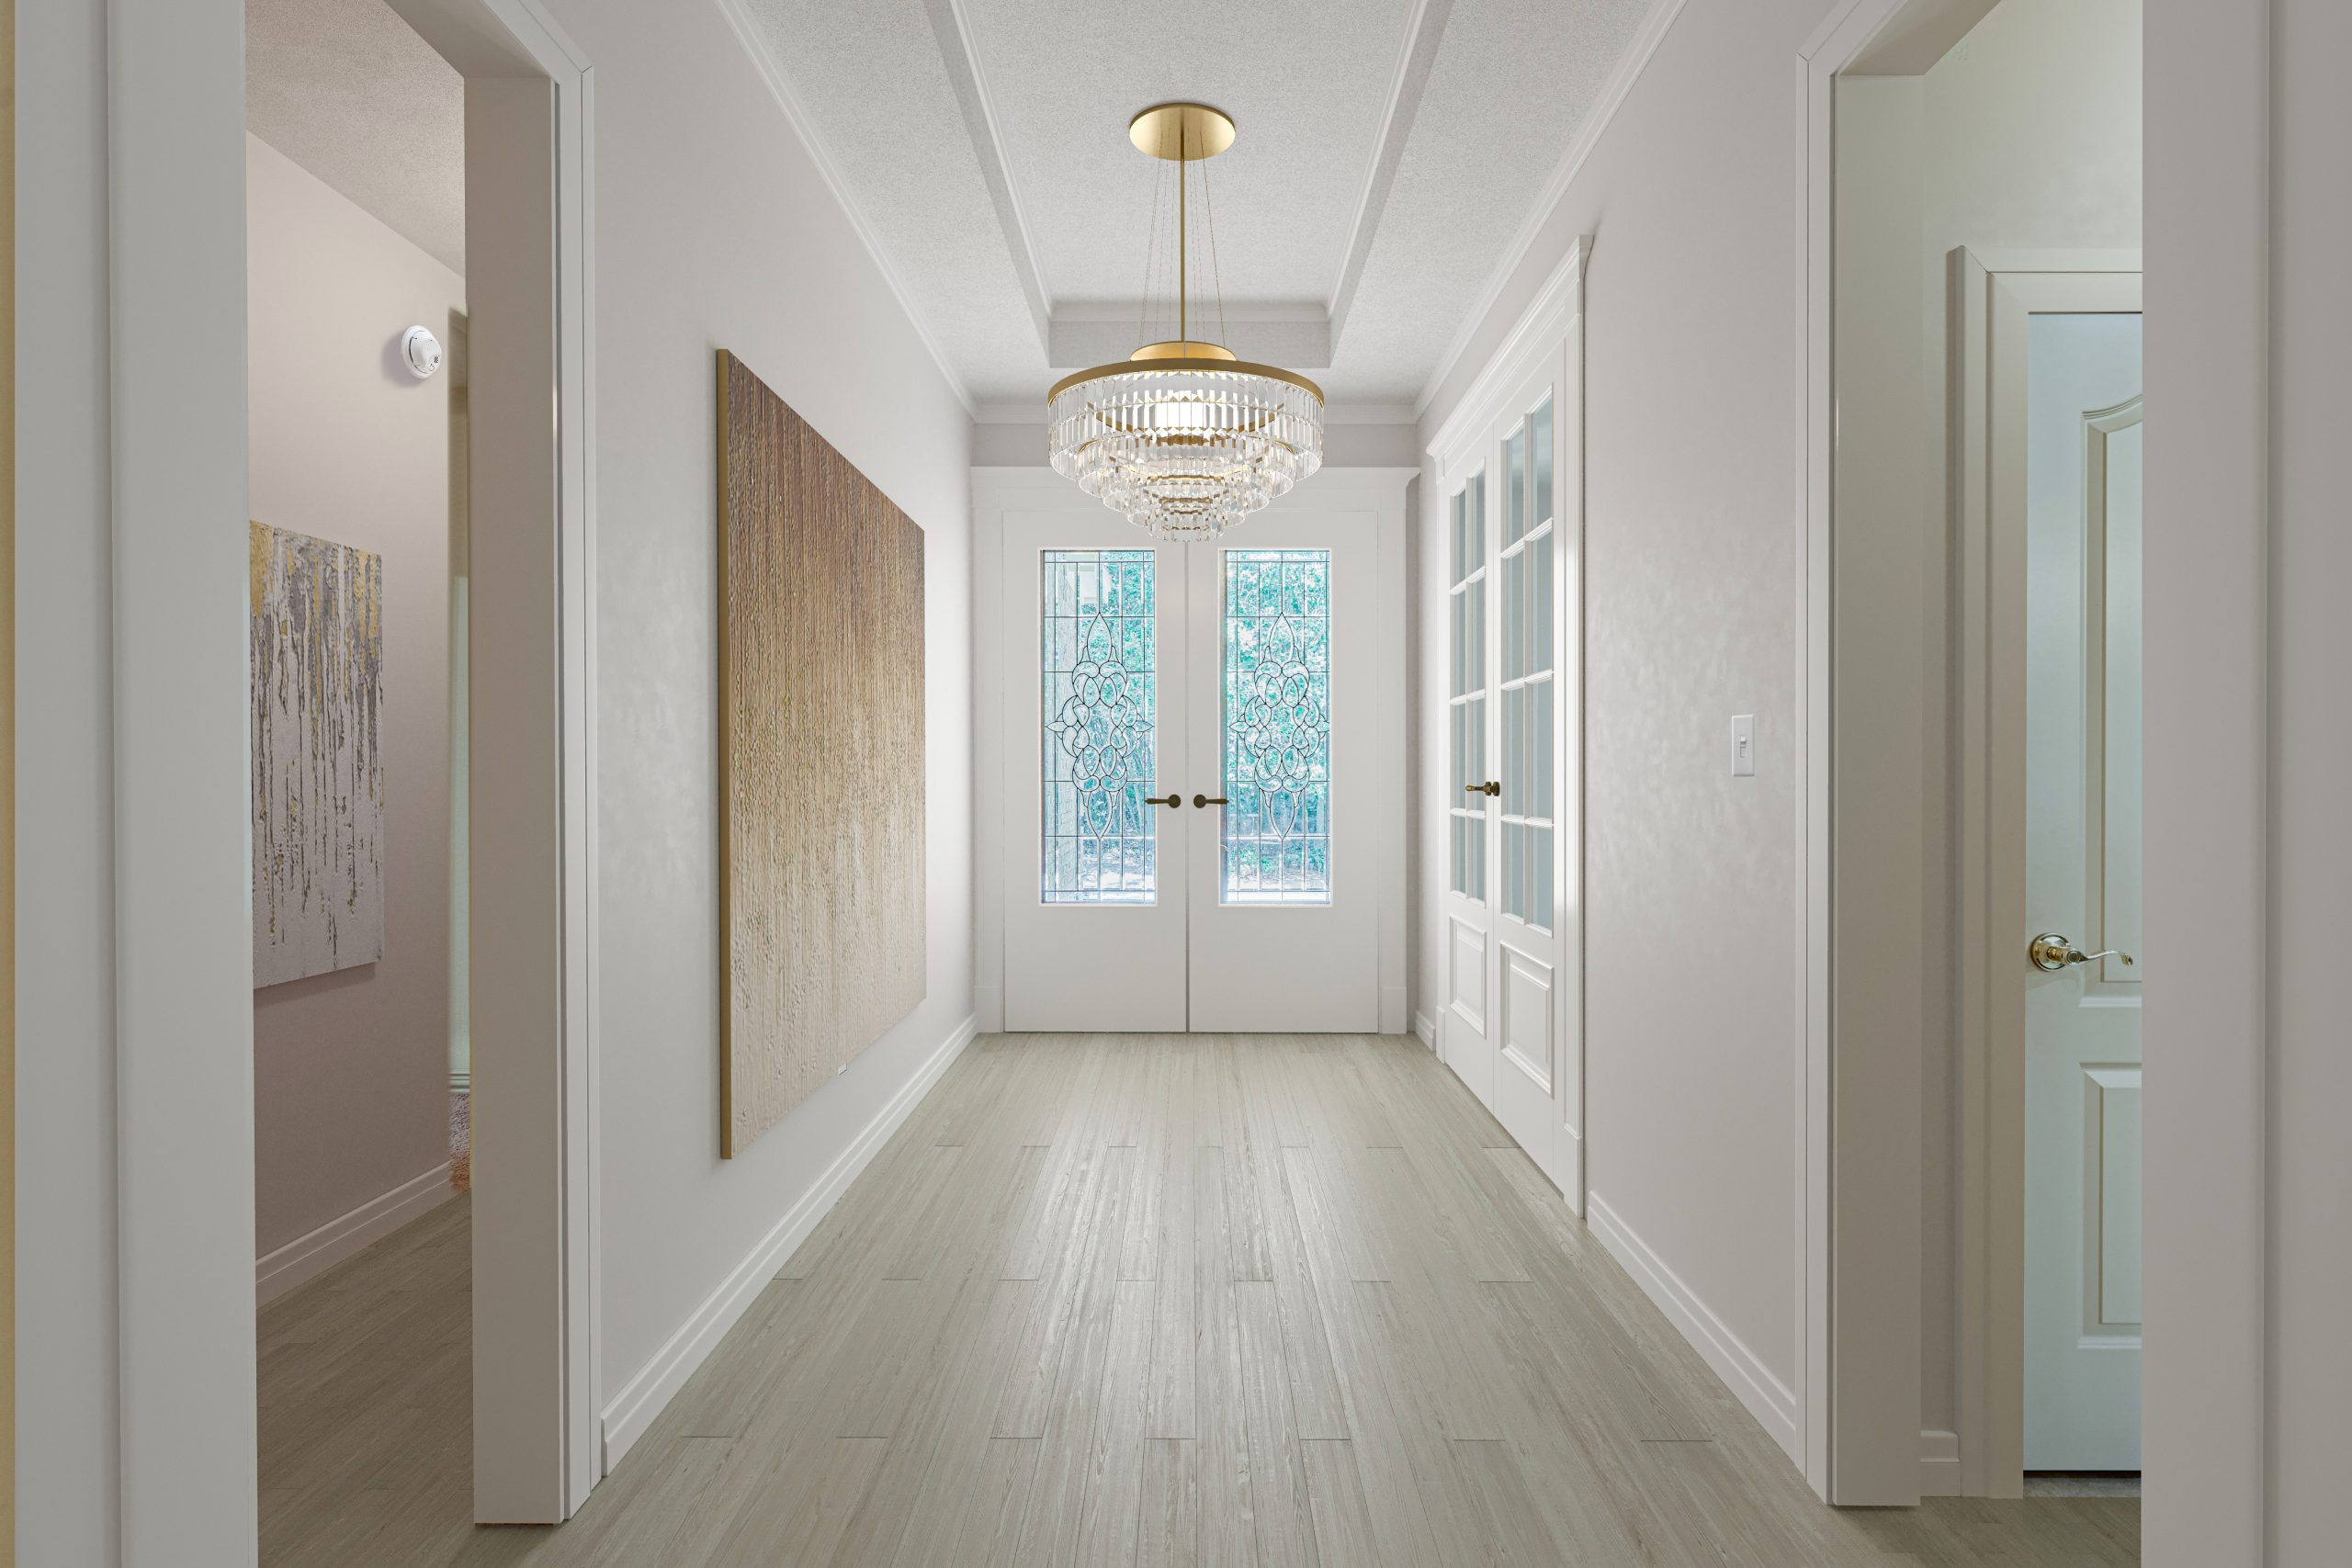 entryway of a residential property after a virtual home renovation